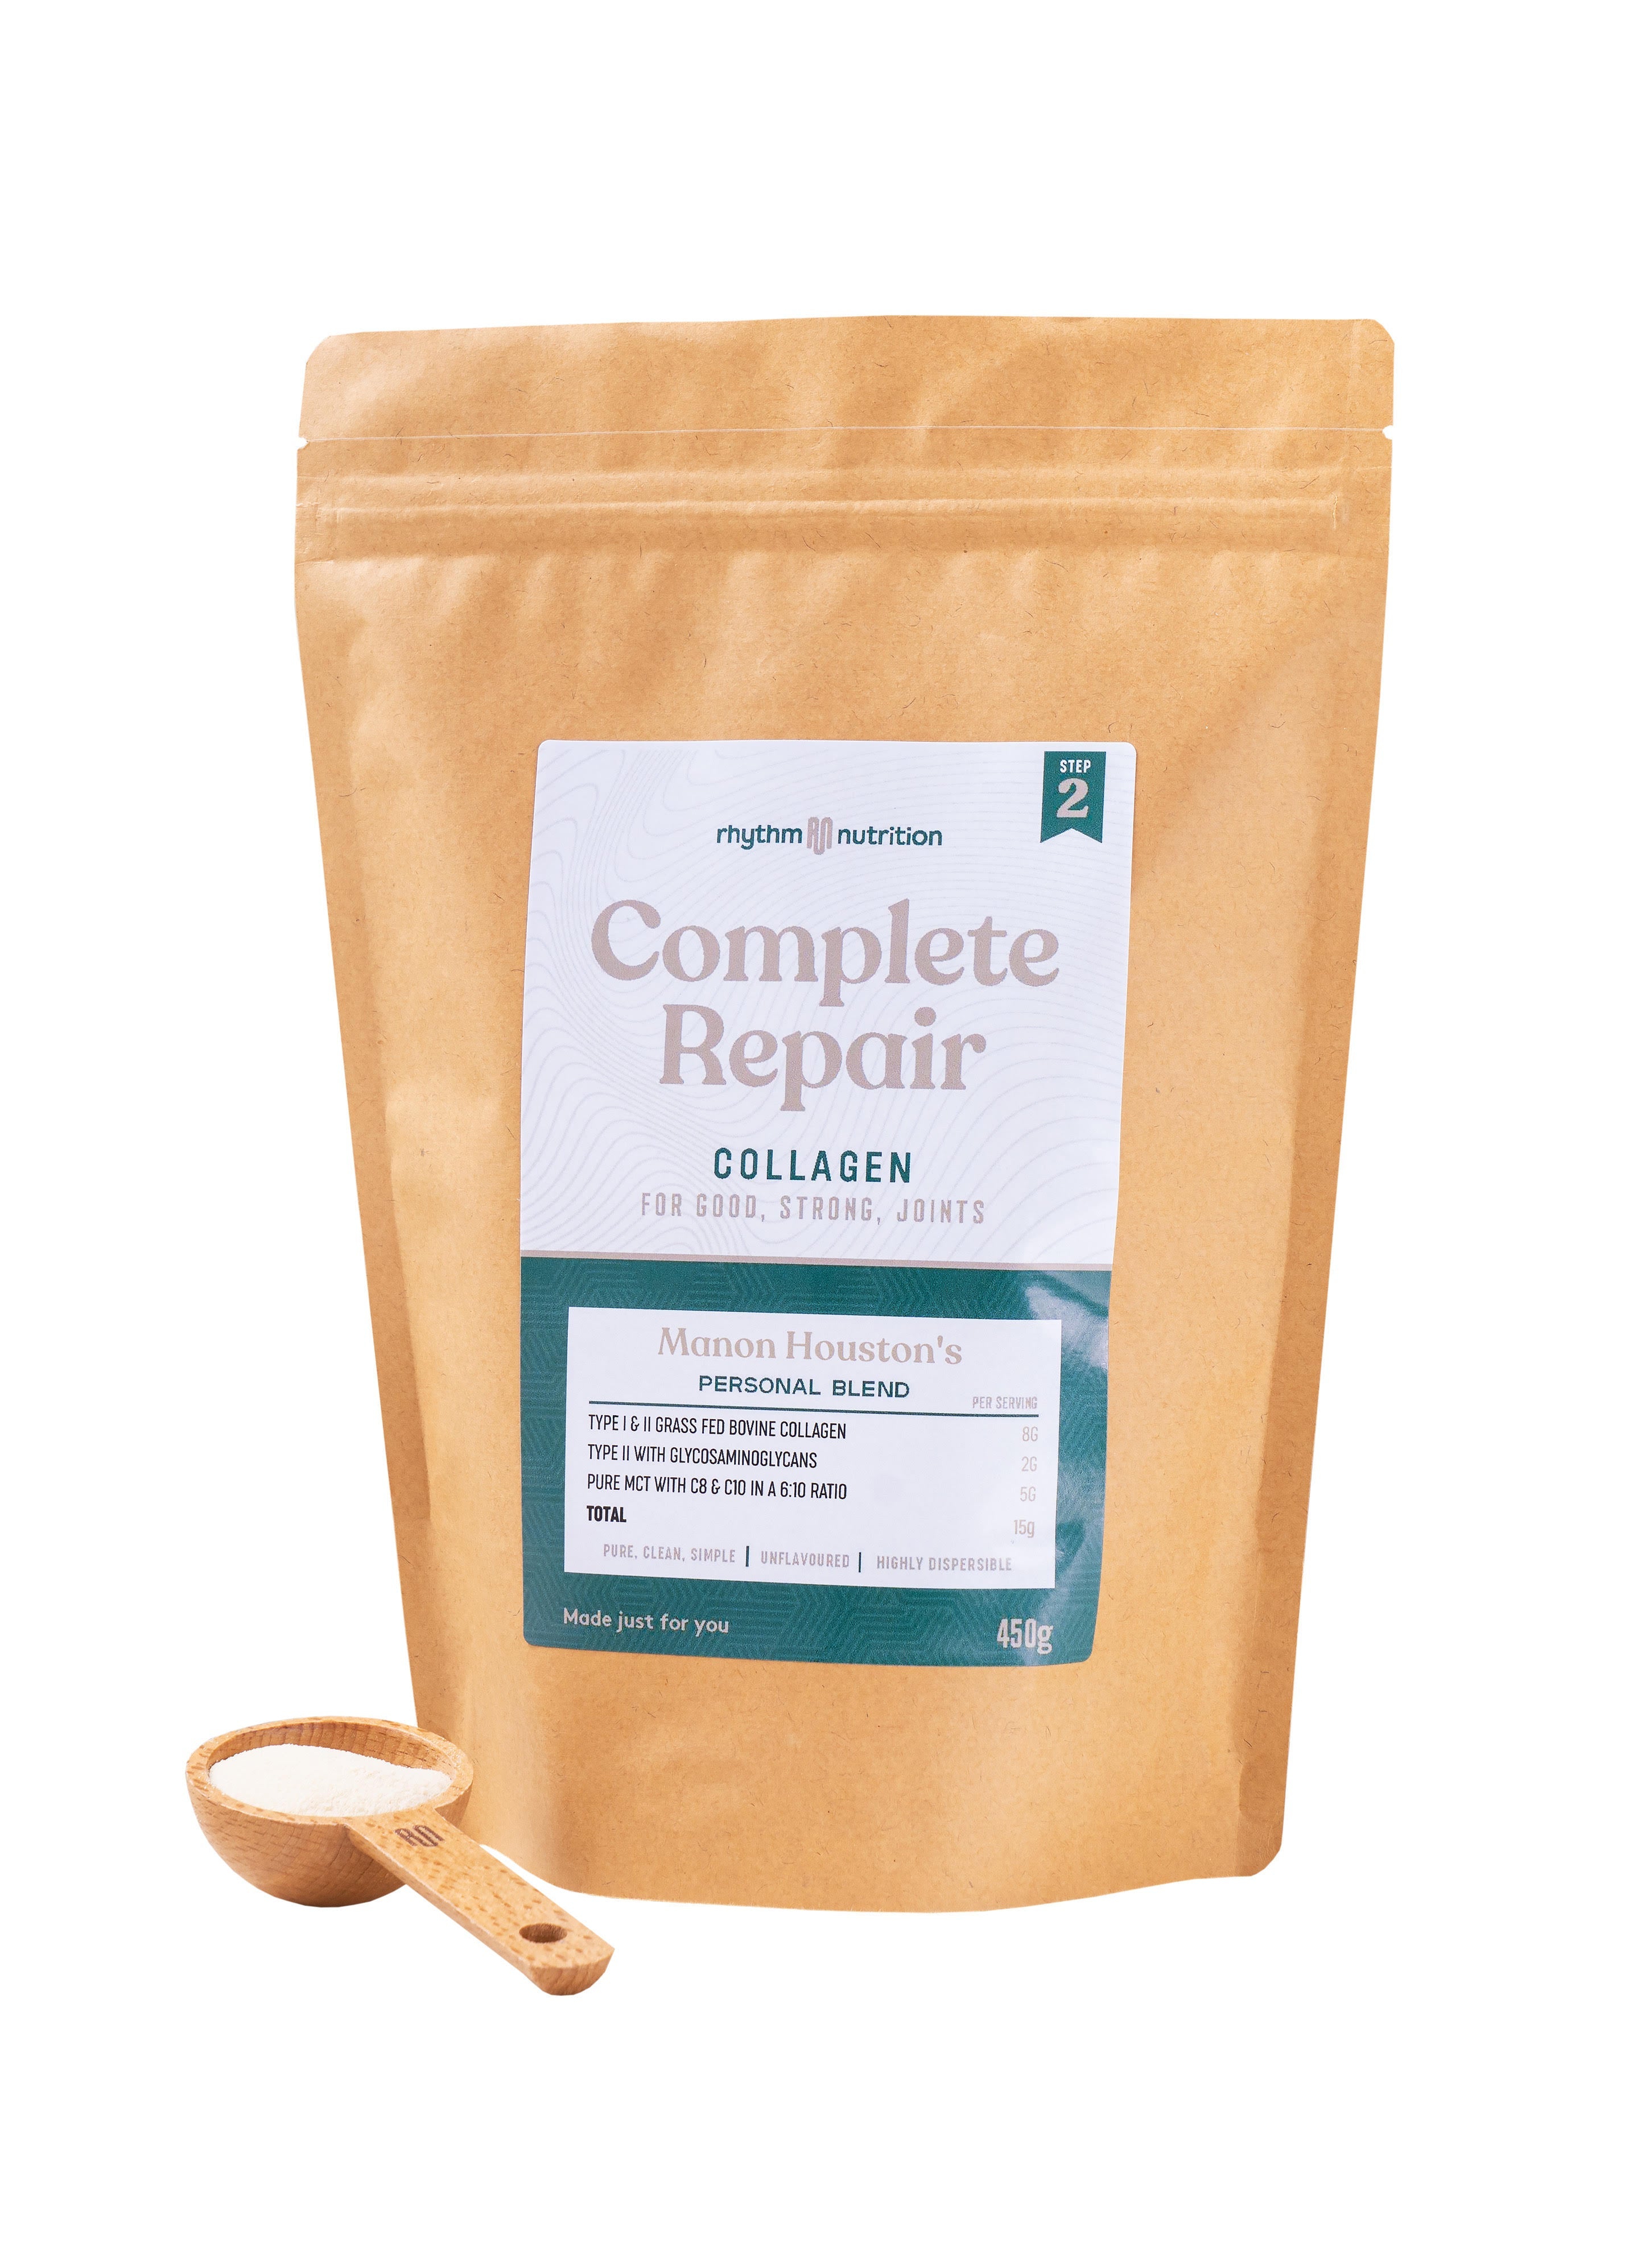 Complete Repair Collagen with Lions Mane - 450g | Rhythm Nutrition